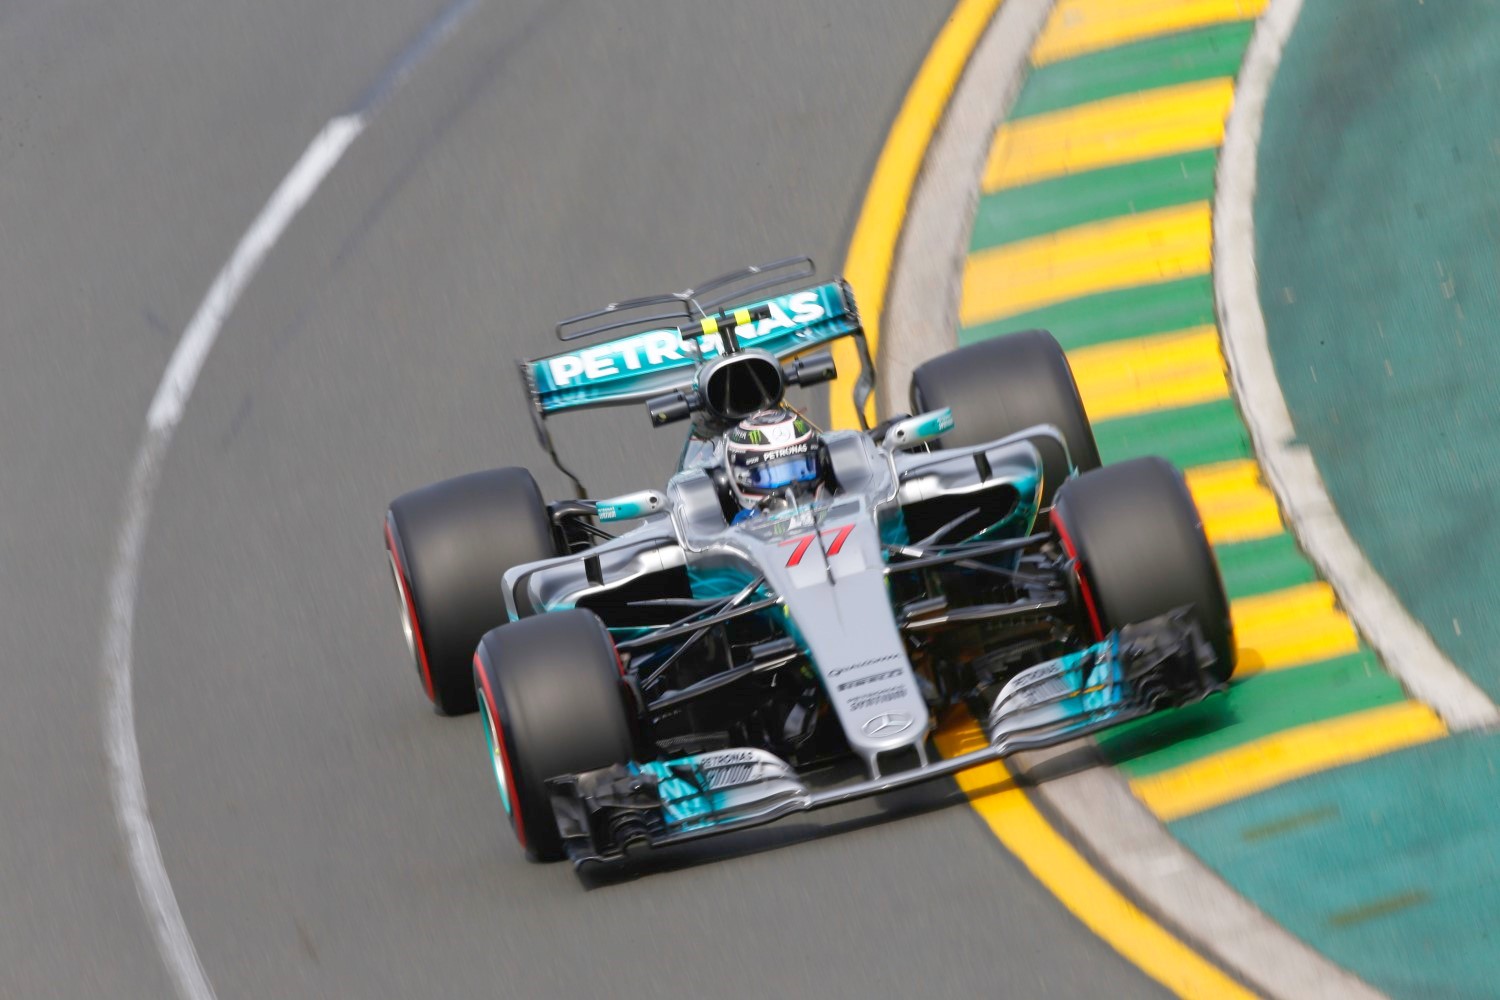 By the end of the Australian GP Bottas was faster than Hamilton, but backed off knowing his chances of passing with the new cars was zero